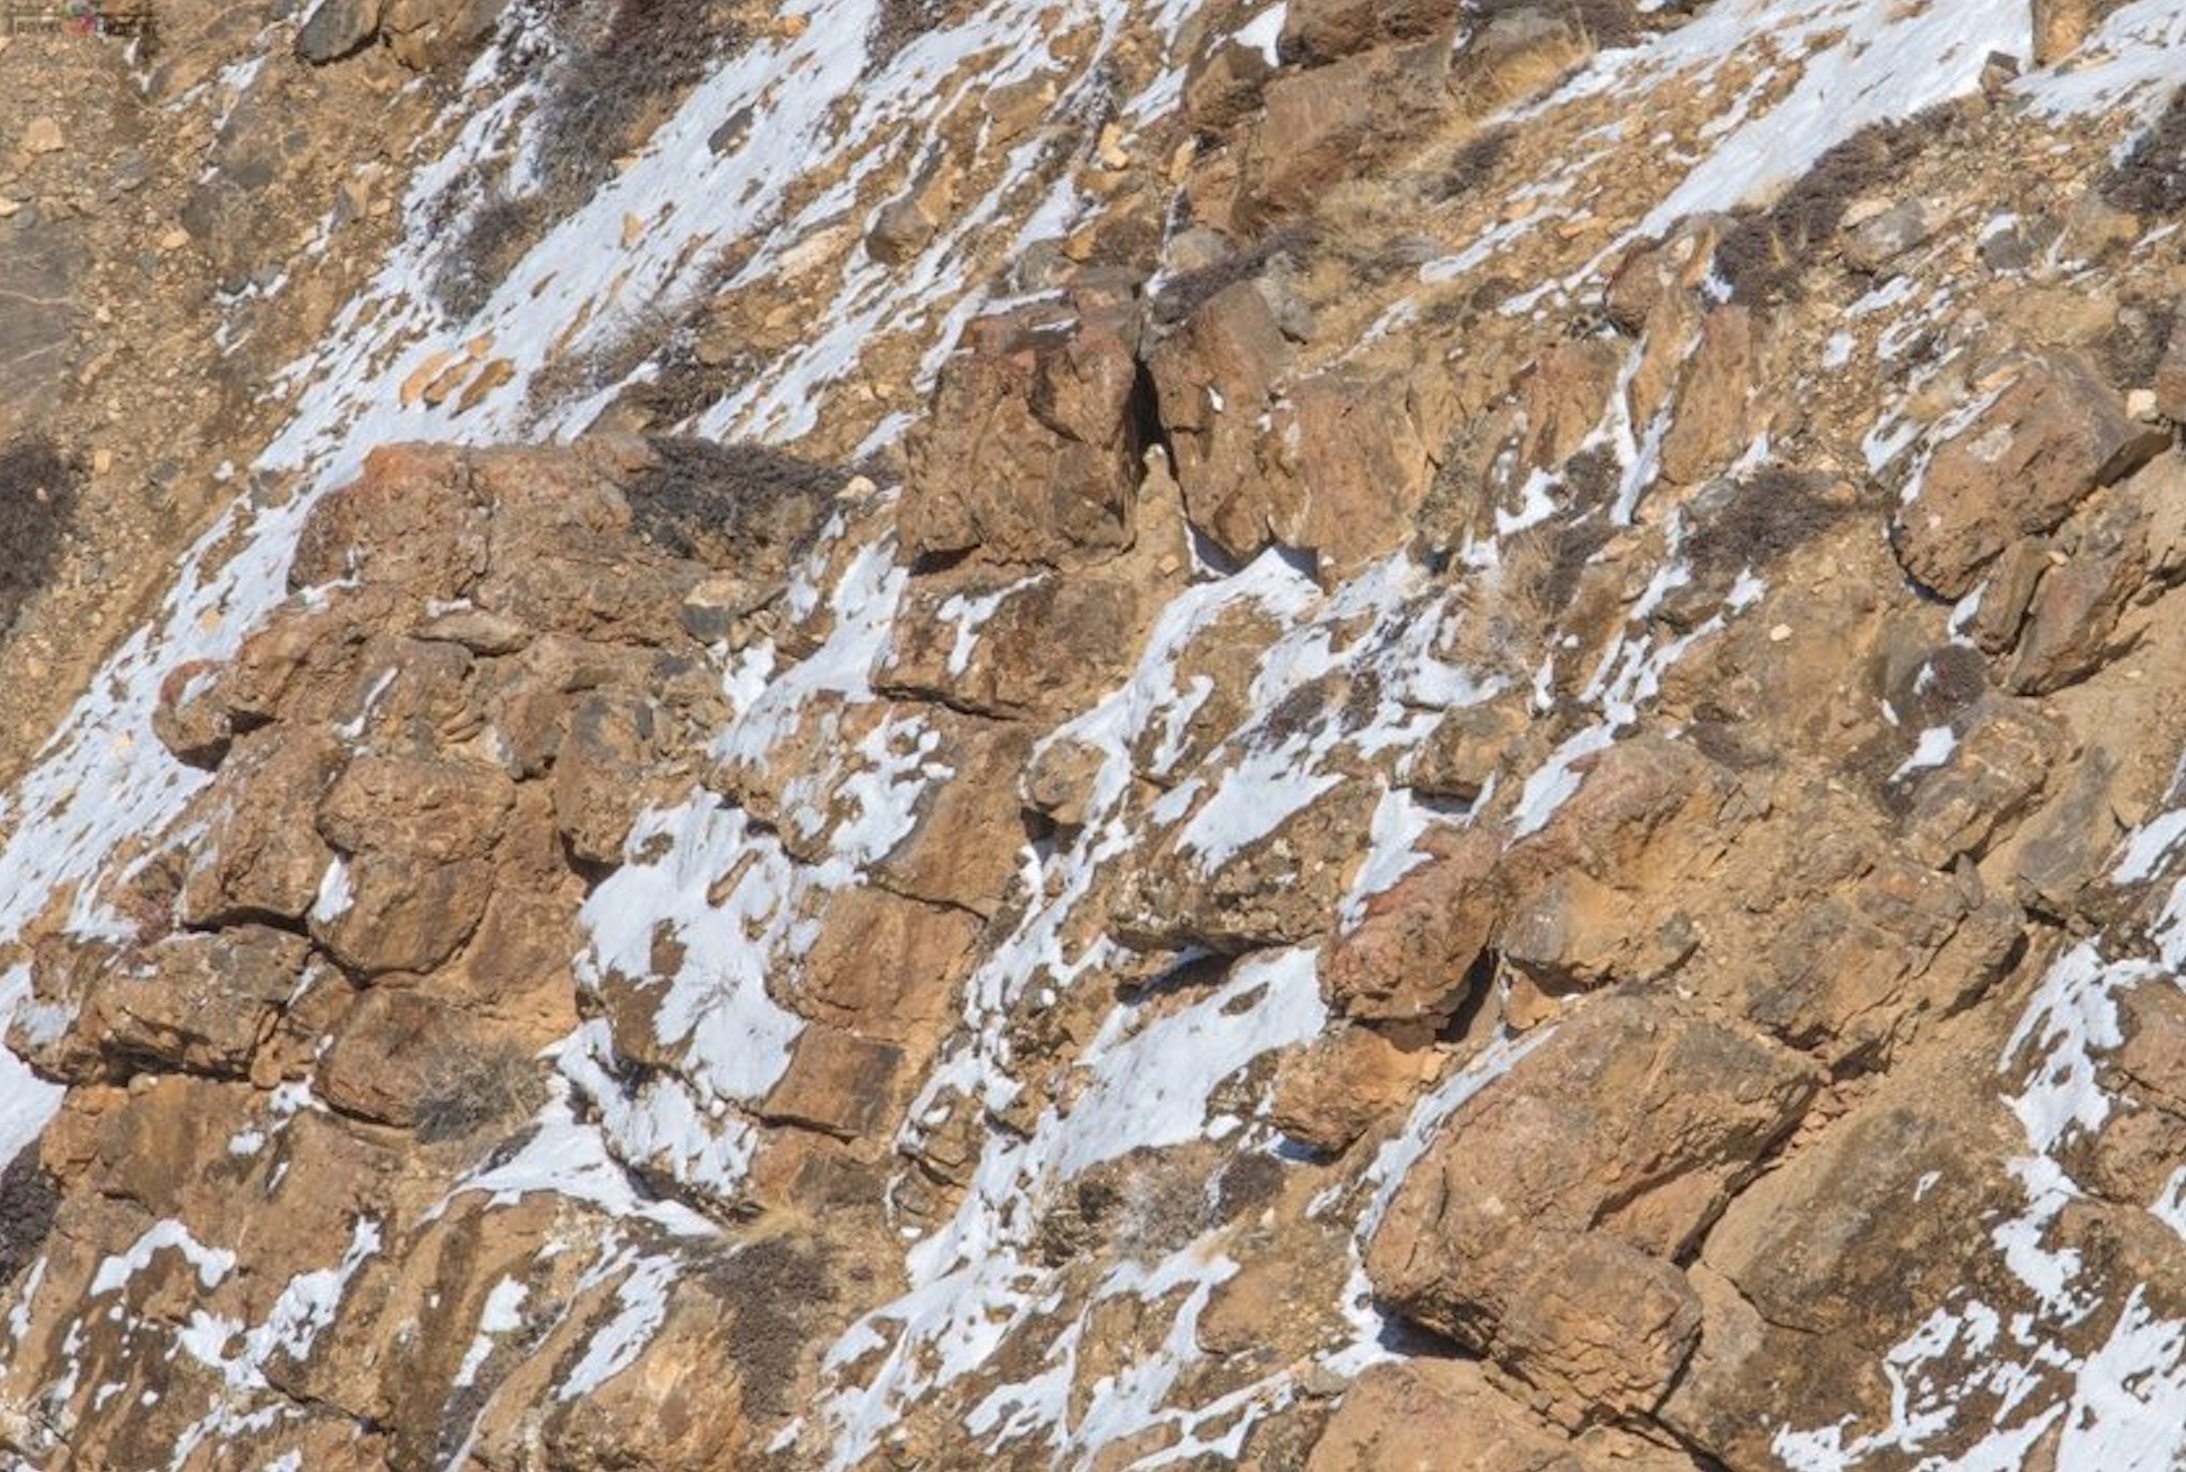 Can You Spot the Snow Leopard Camouflaged In This Photo?